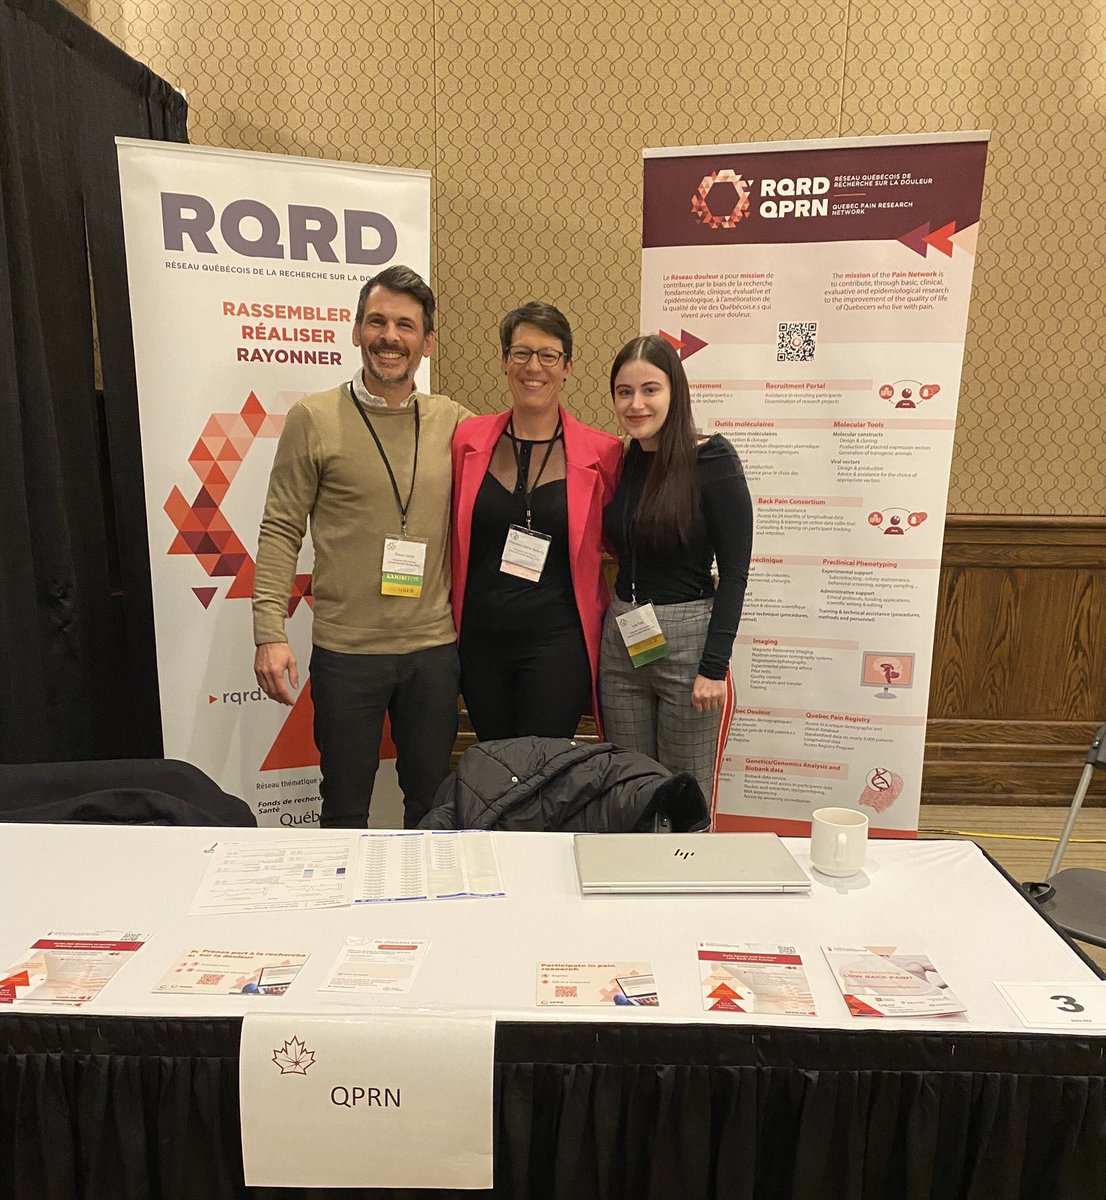 📍Our team is at the #CanadianPain23 meeting

Researchers, people with lived experience, trainees and anyone else passioned about pain-related content, come chat with us at our booth to find out about all our activities available for YOU.

#Pain #PWLE #paintrainees #painresearch